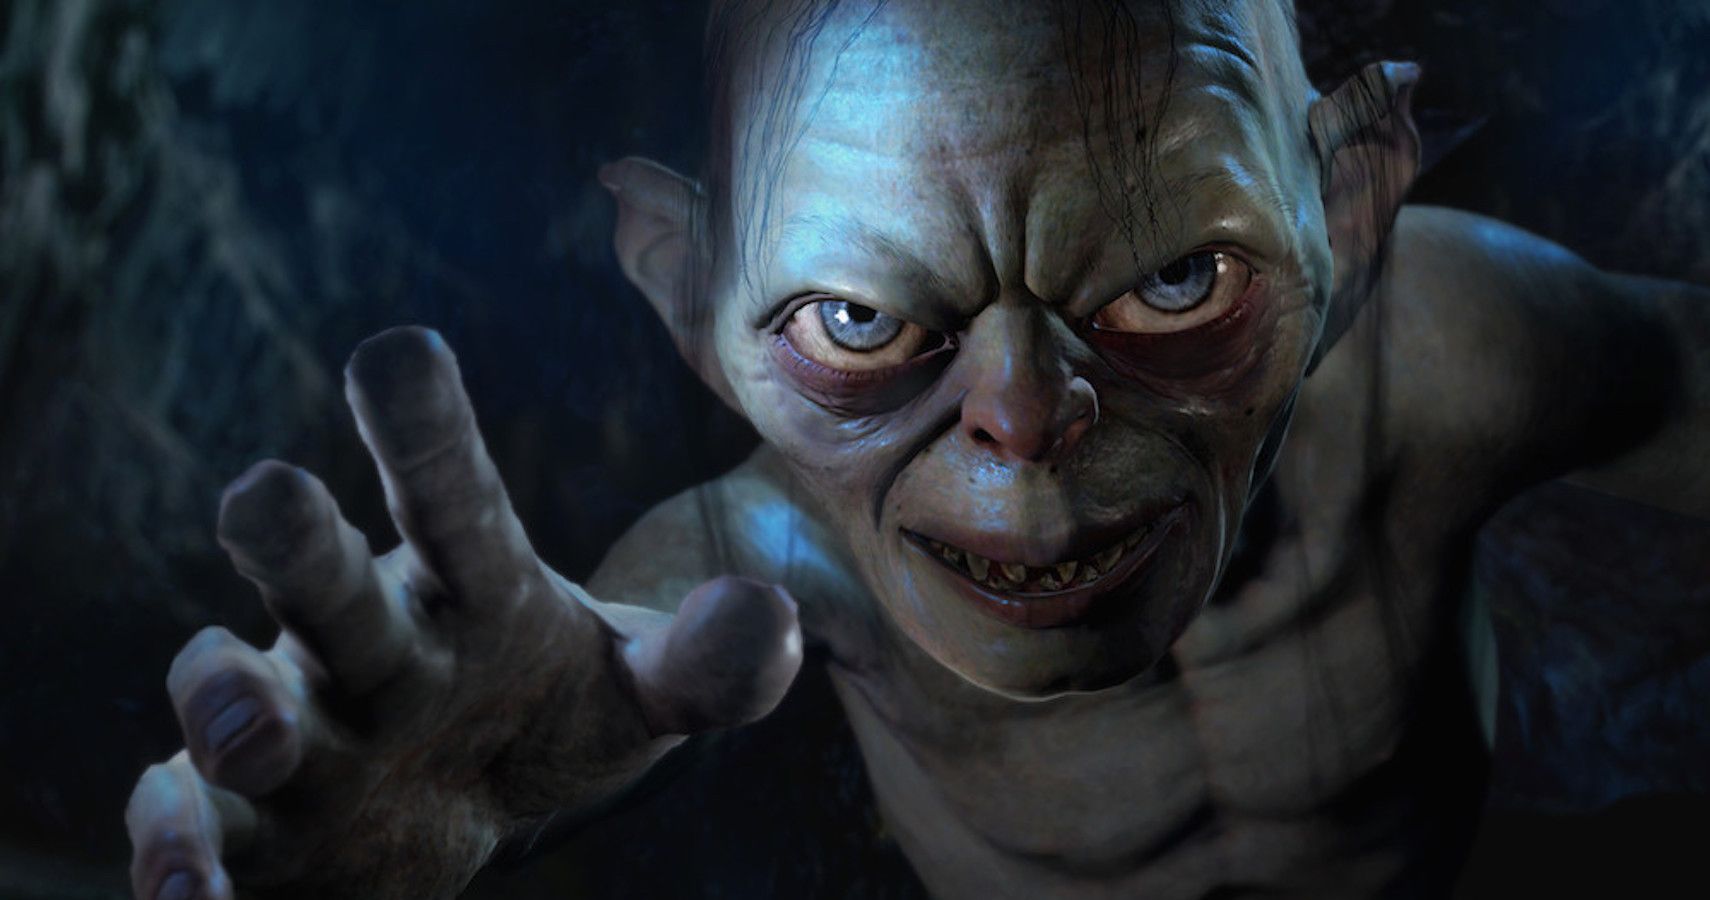 story of gollum lord of the rings